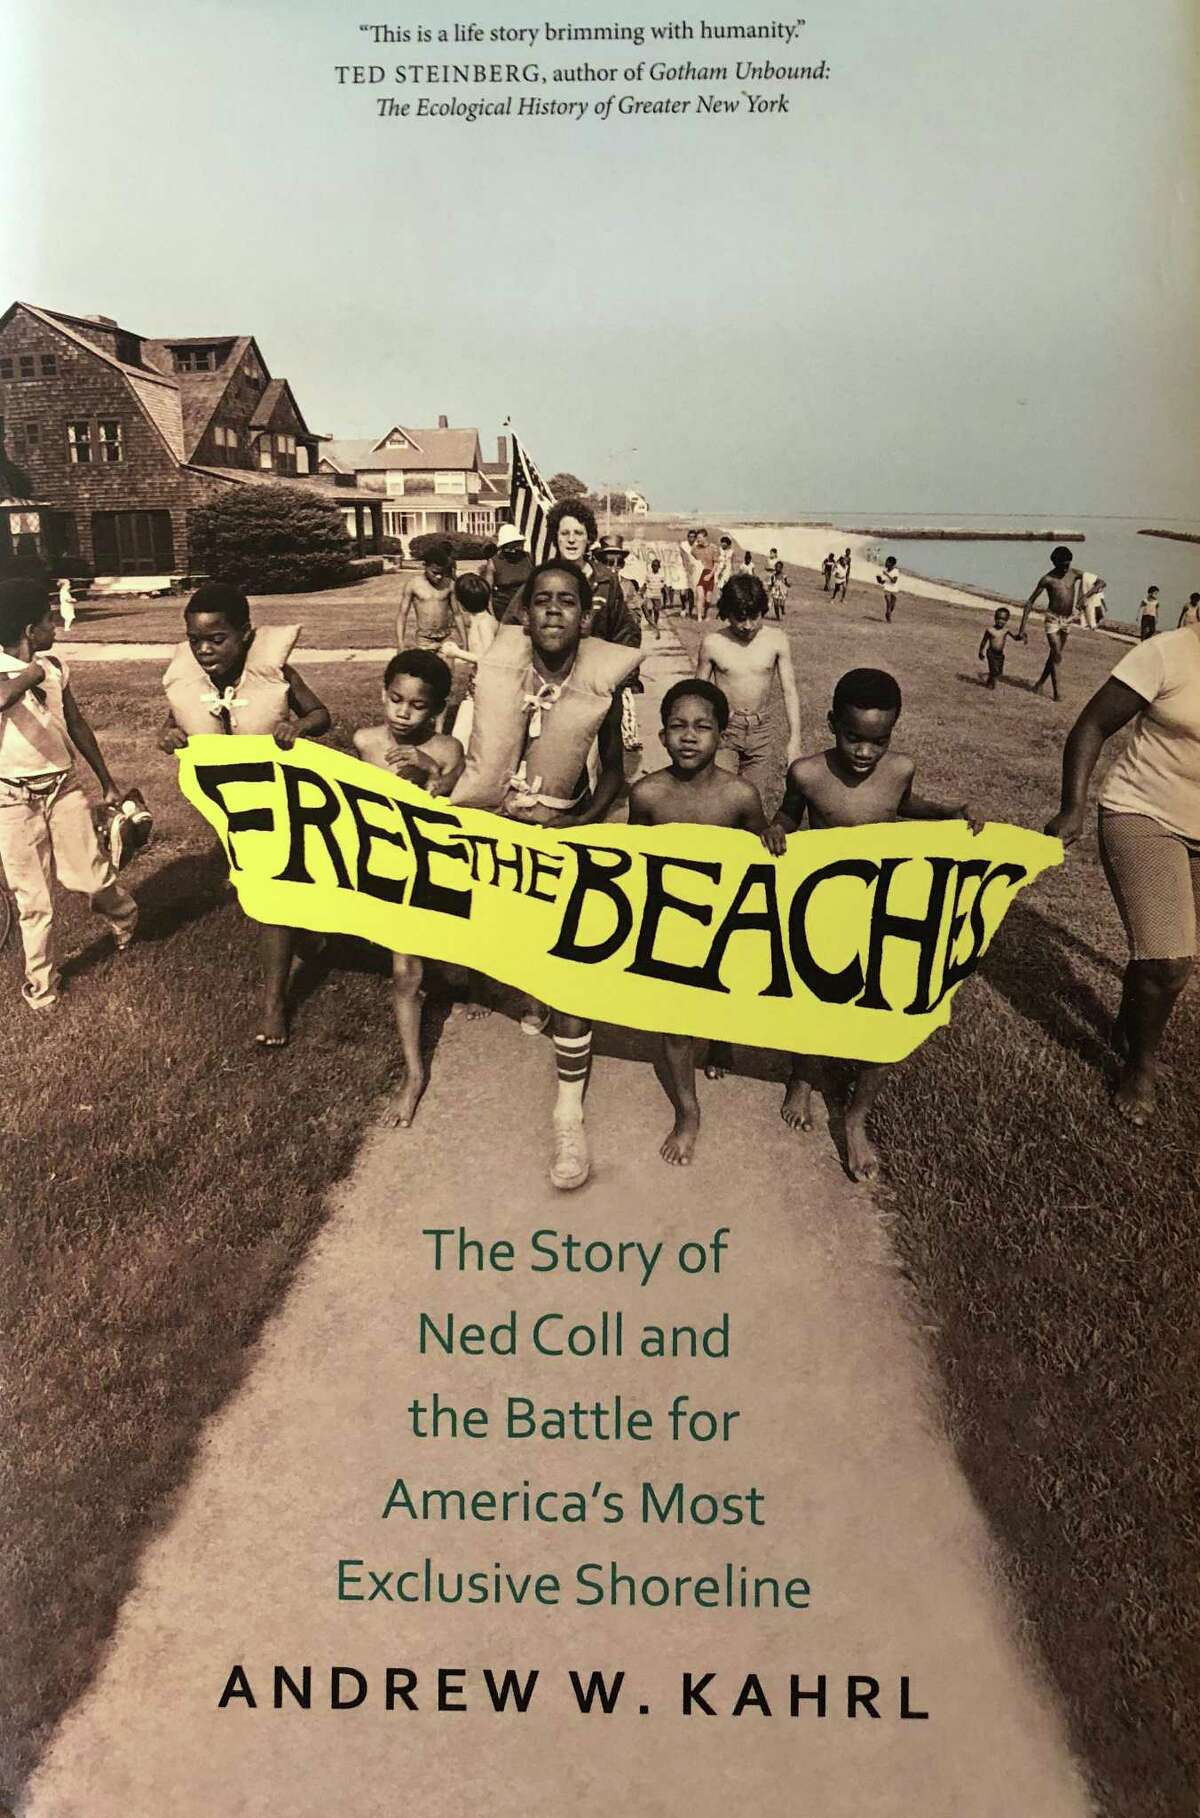 Andrew Kahrl's book, "Free the Beaches: The Story of Ned Coll and the Battle for America's Most Exclusive Shoreline," came out March, 2018.